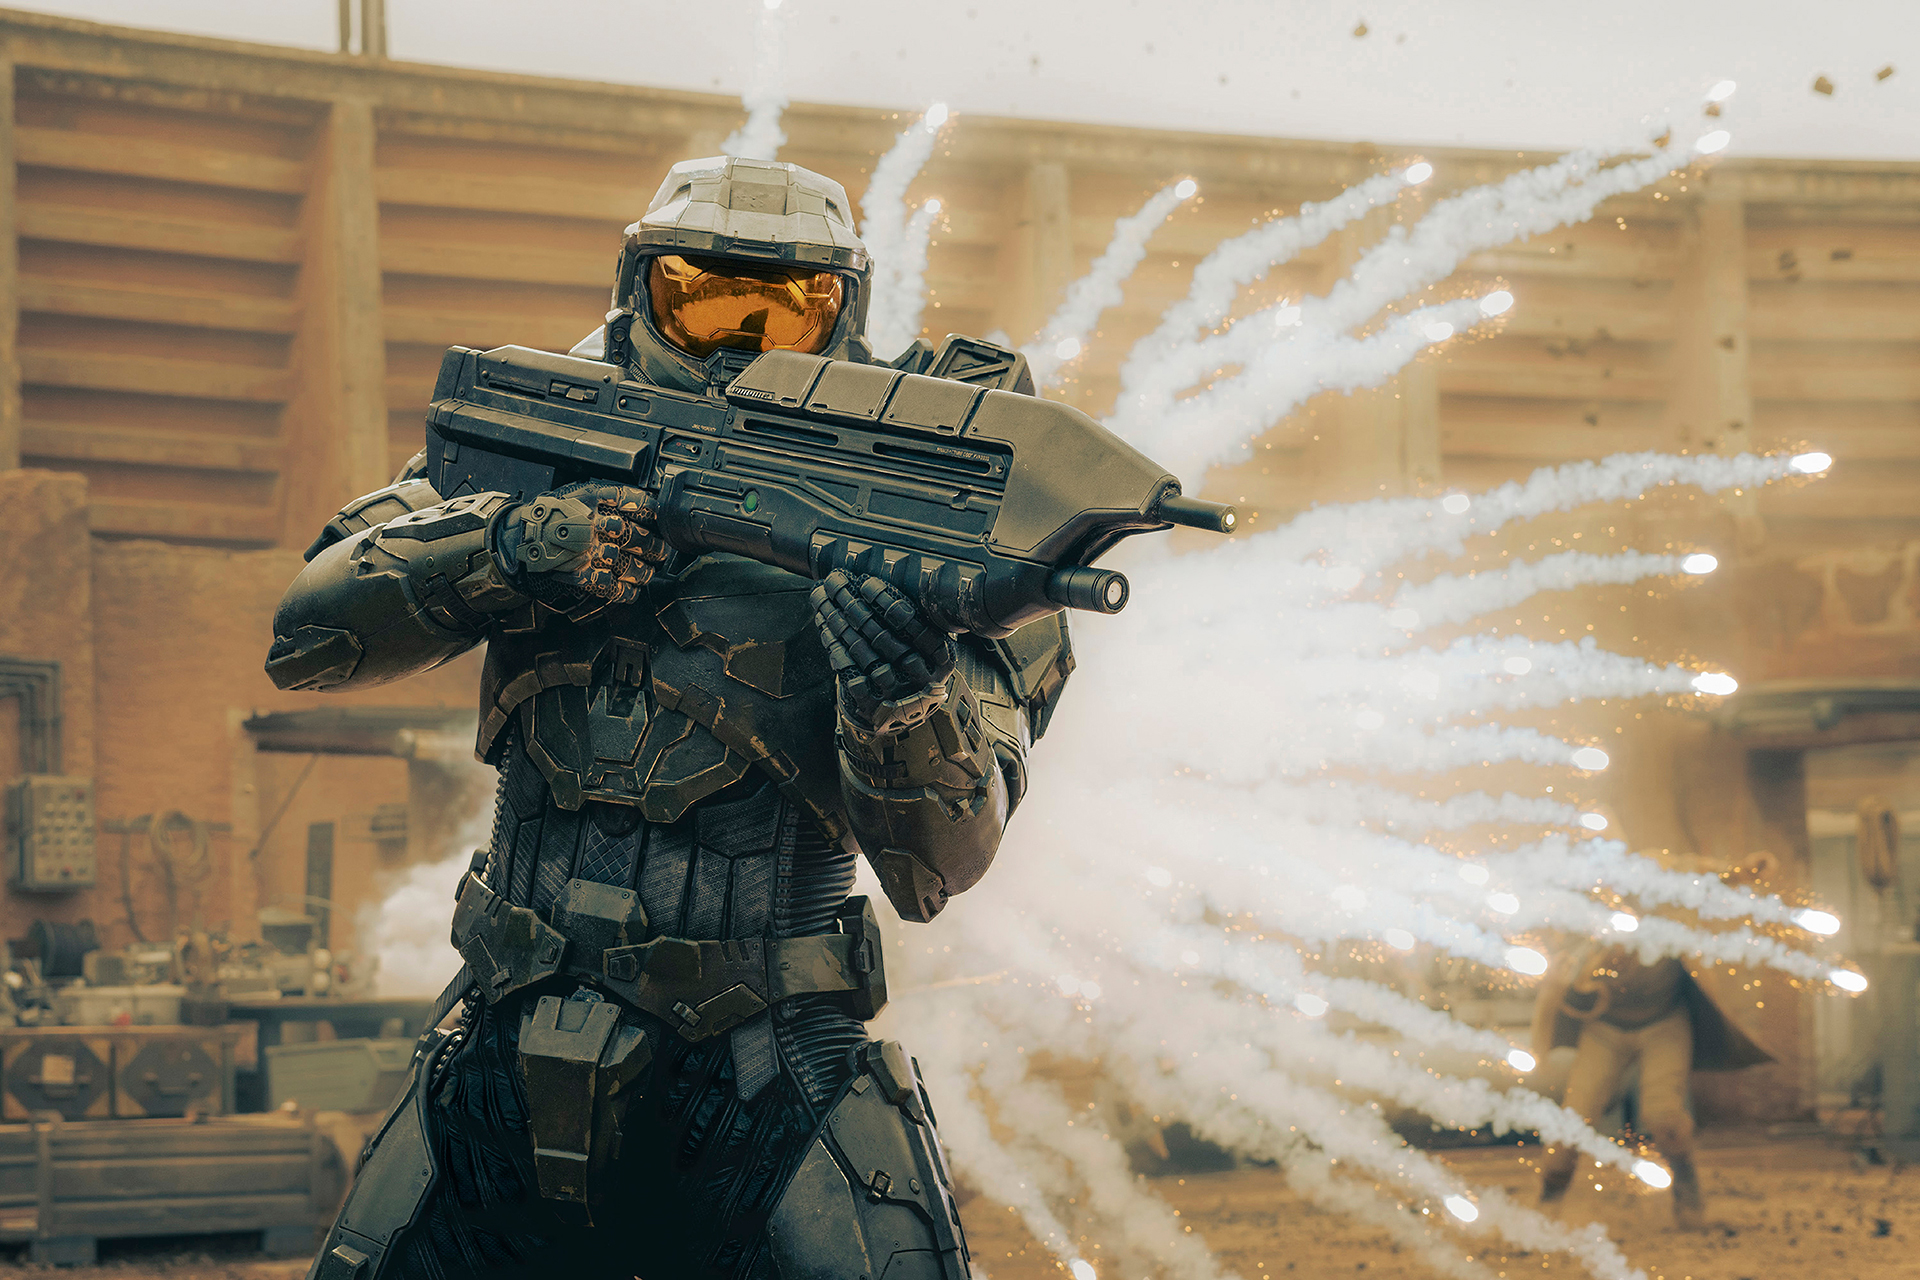 The first episode of ‘Halo’ is free to watch on YouTube for a week